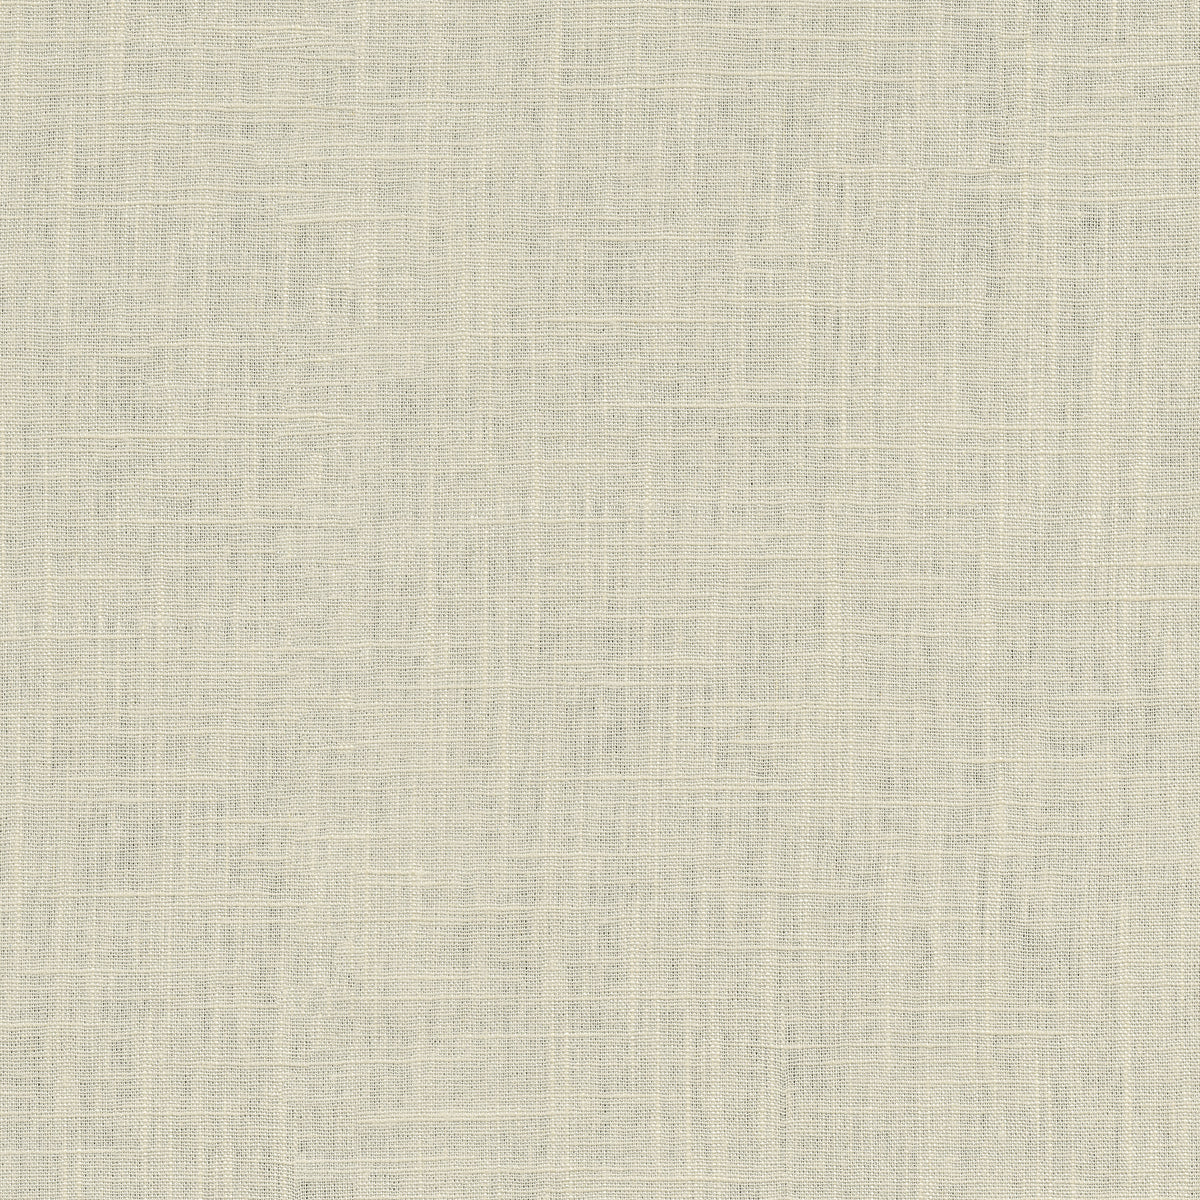 P/K Lifestyles Chester - Parchment 412054 Fabric Swatch